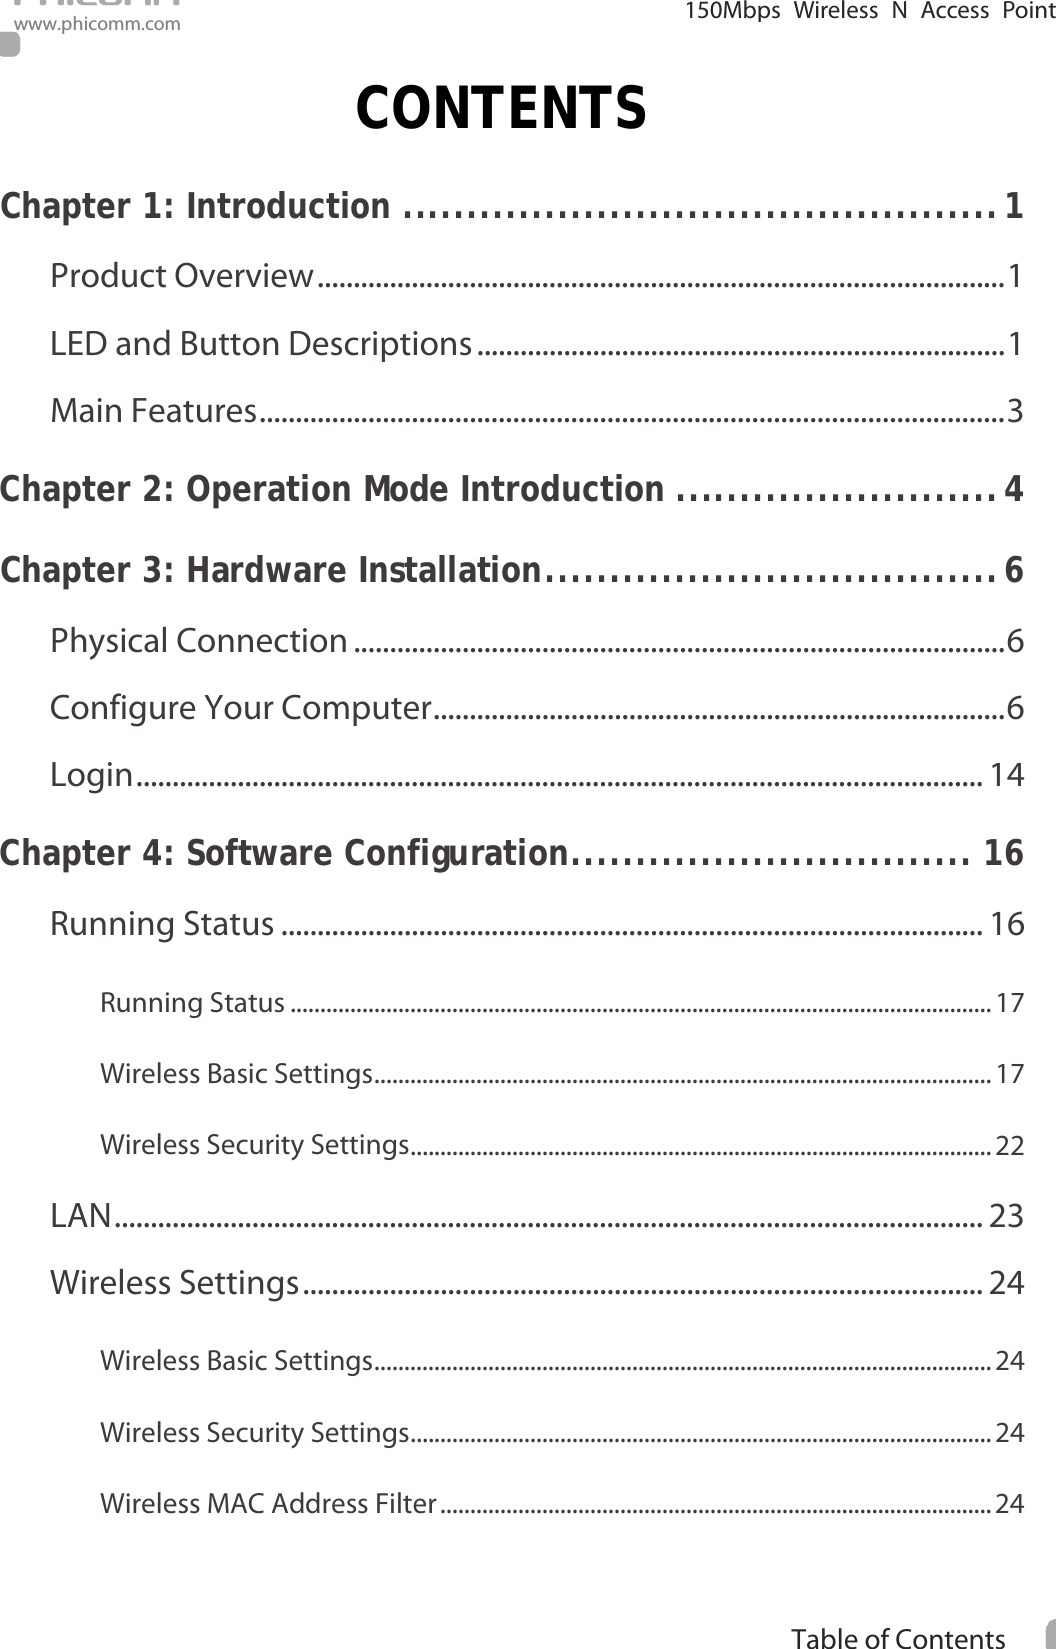                                                            i Table of Contents  150Mbps Wireless N Access Point www.phicomm.com CONTENTS Chapter 1: Introduction   .............................................. 1Product Overview   ............................................................................................... 1LED and Button Descriptions   ......................................................................... 1Main Features   ....................................................................................................... 3Chapter 2: Operation Mode Introduction   ......................... 4Chapter 3: Hardware Installation   ................................... 6Physical Connection   .......................................................................................... 6Configure Your Computer   ............................................................................... 6Login   ..................................................................................................................... 14Chapter 4: Software Configuration   ............................... 16Running Status   ................................................................................................. 16Running Status   ..................................................................................................................... 17Wireless Basic Settings   ....................................................................................................... 17Wireless Security Settings   ................................................................................................. 22LAN   ........................................................................................................................ 23Wireless Settings   .............................................................................................. 24Wireless Basic Settings   ....................................................................................................... 24Wireless Security Settings   ................................................................................................. 24Wireless MAC Address Filter   ............................................................................................ 24